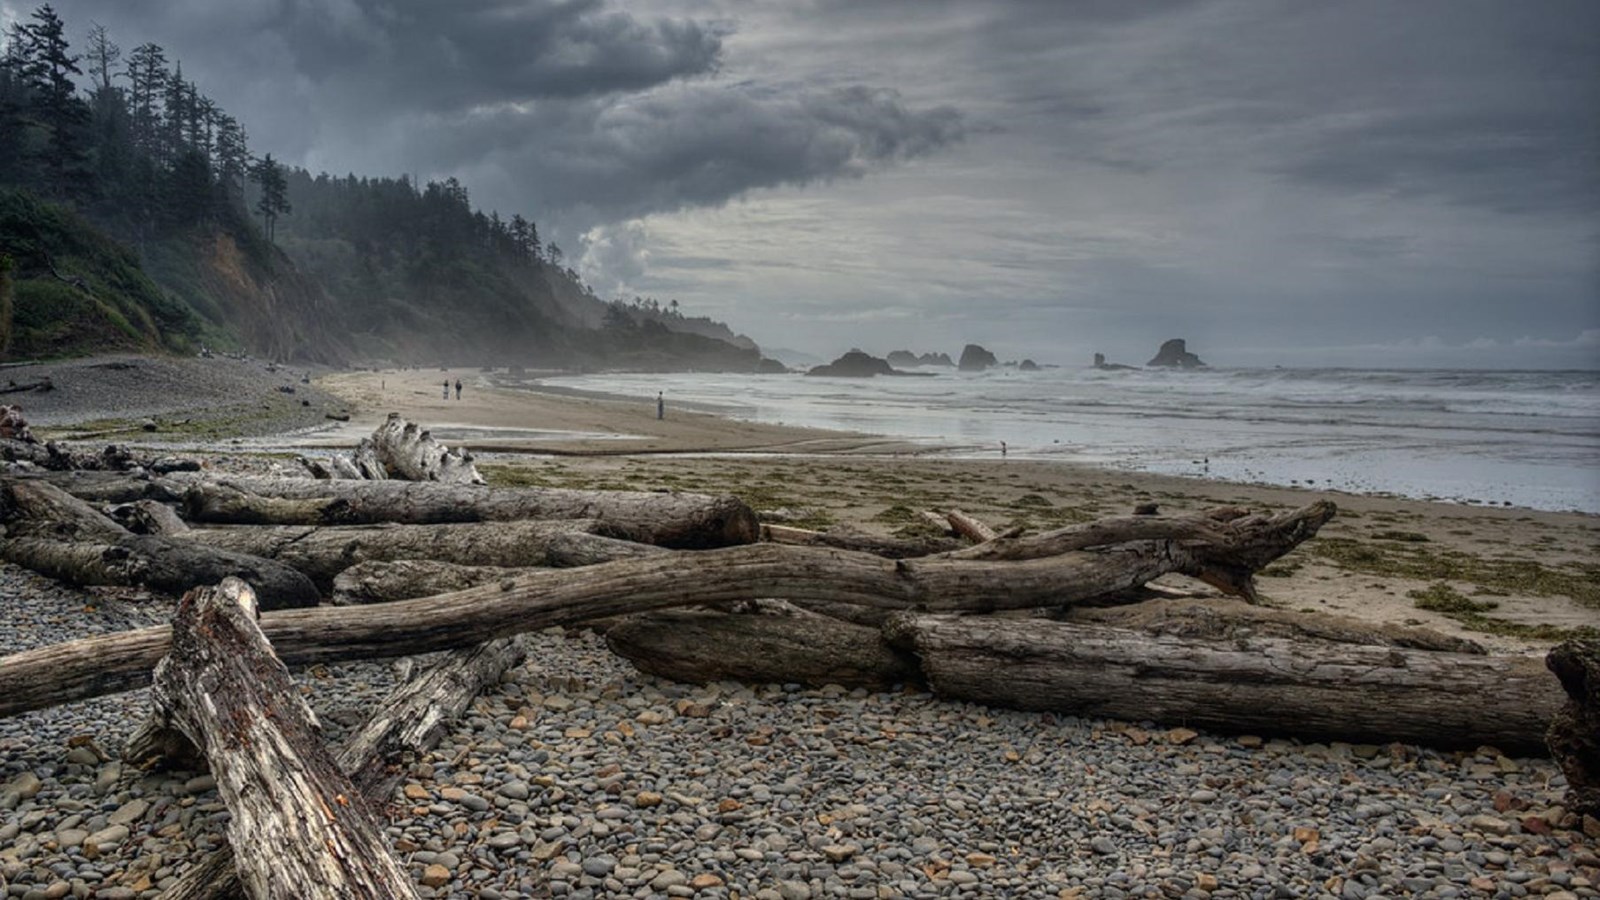 Driftwood sits on the shore, dramatic heavy clouds hang in the sky as the sun peeks through. 